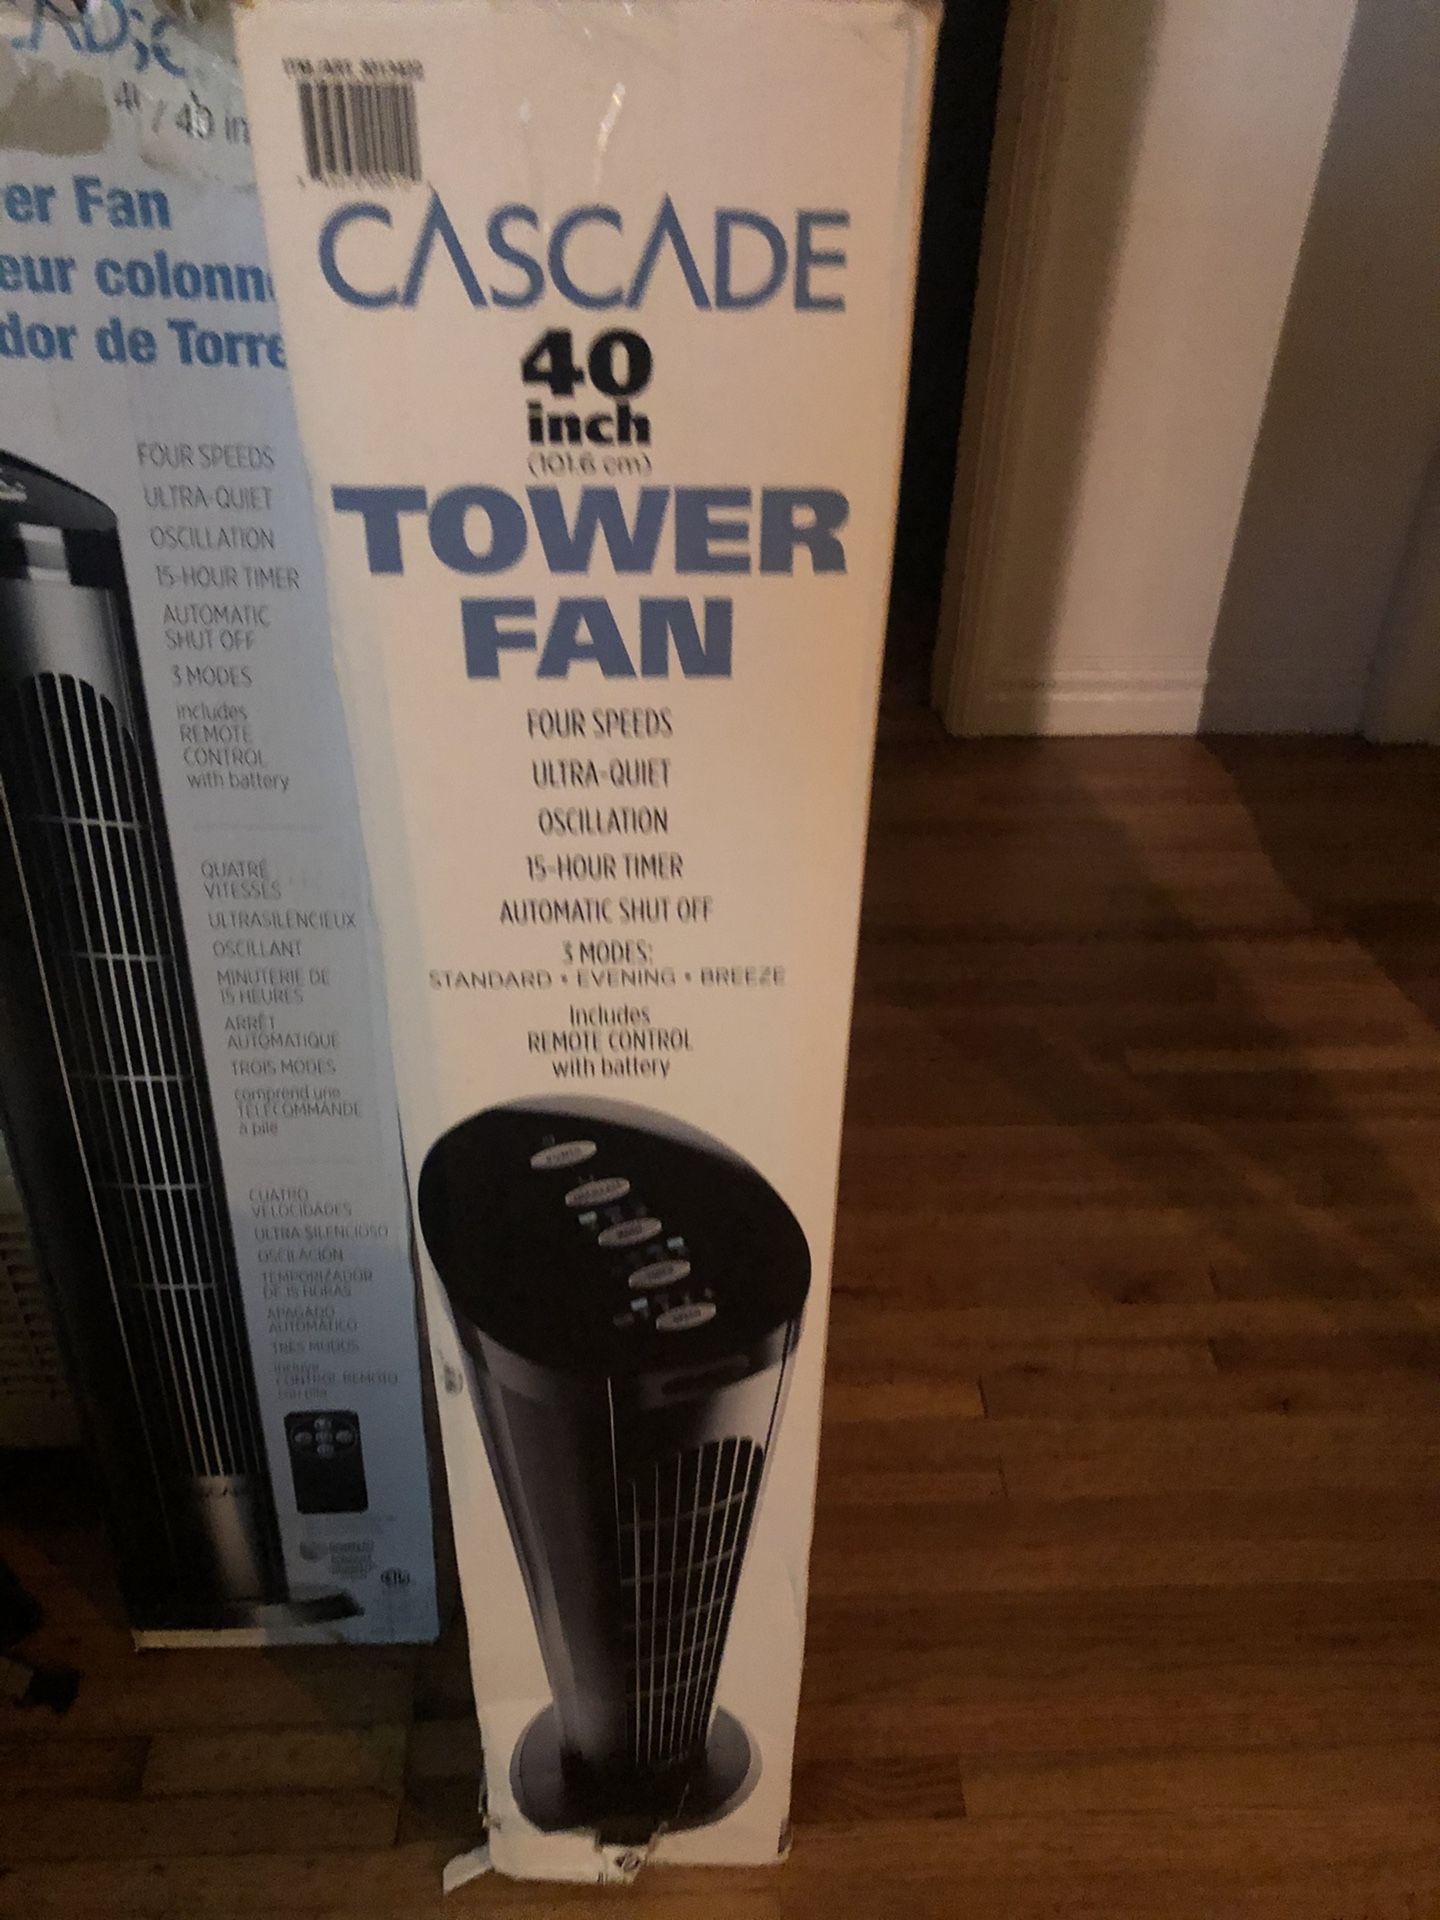 Brand new Tower Fans never used